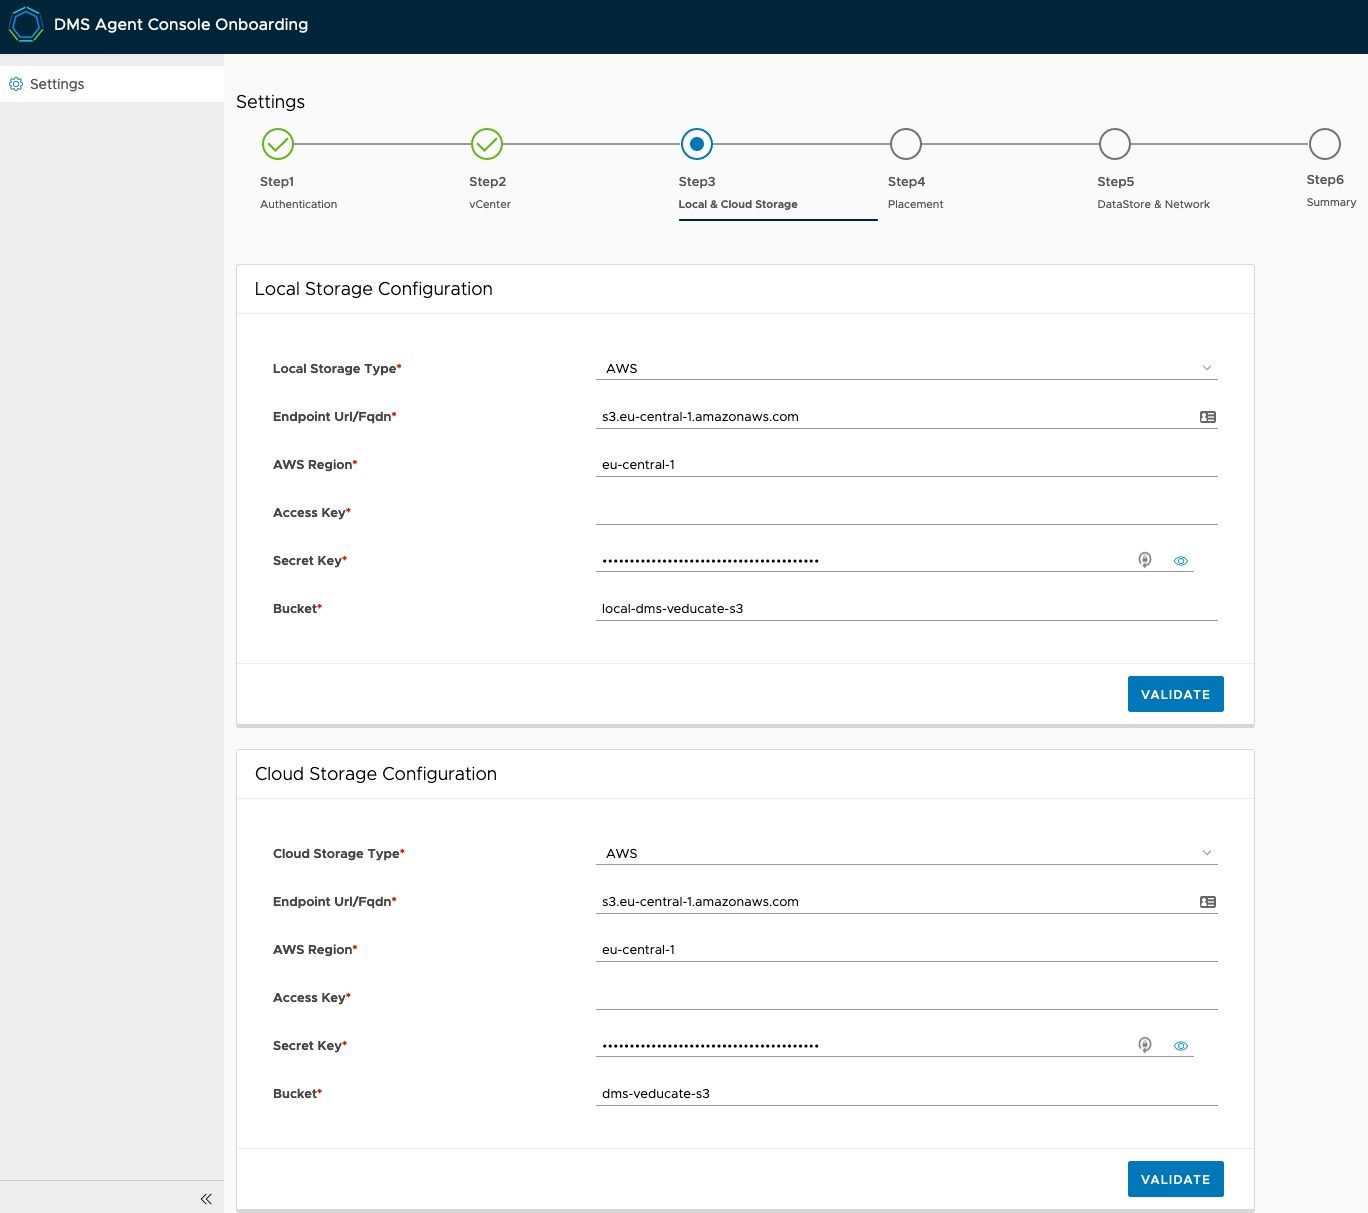 Data Management for Tanzu - Agent onboarding - Local & Cloud Storage Configuration